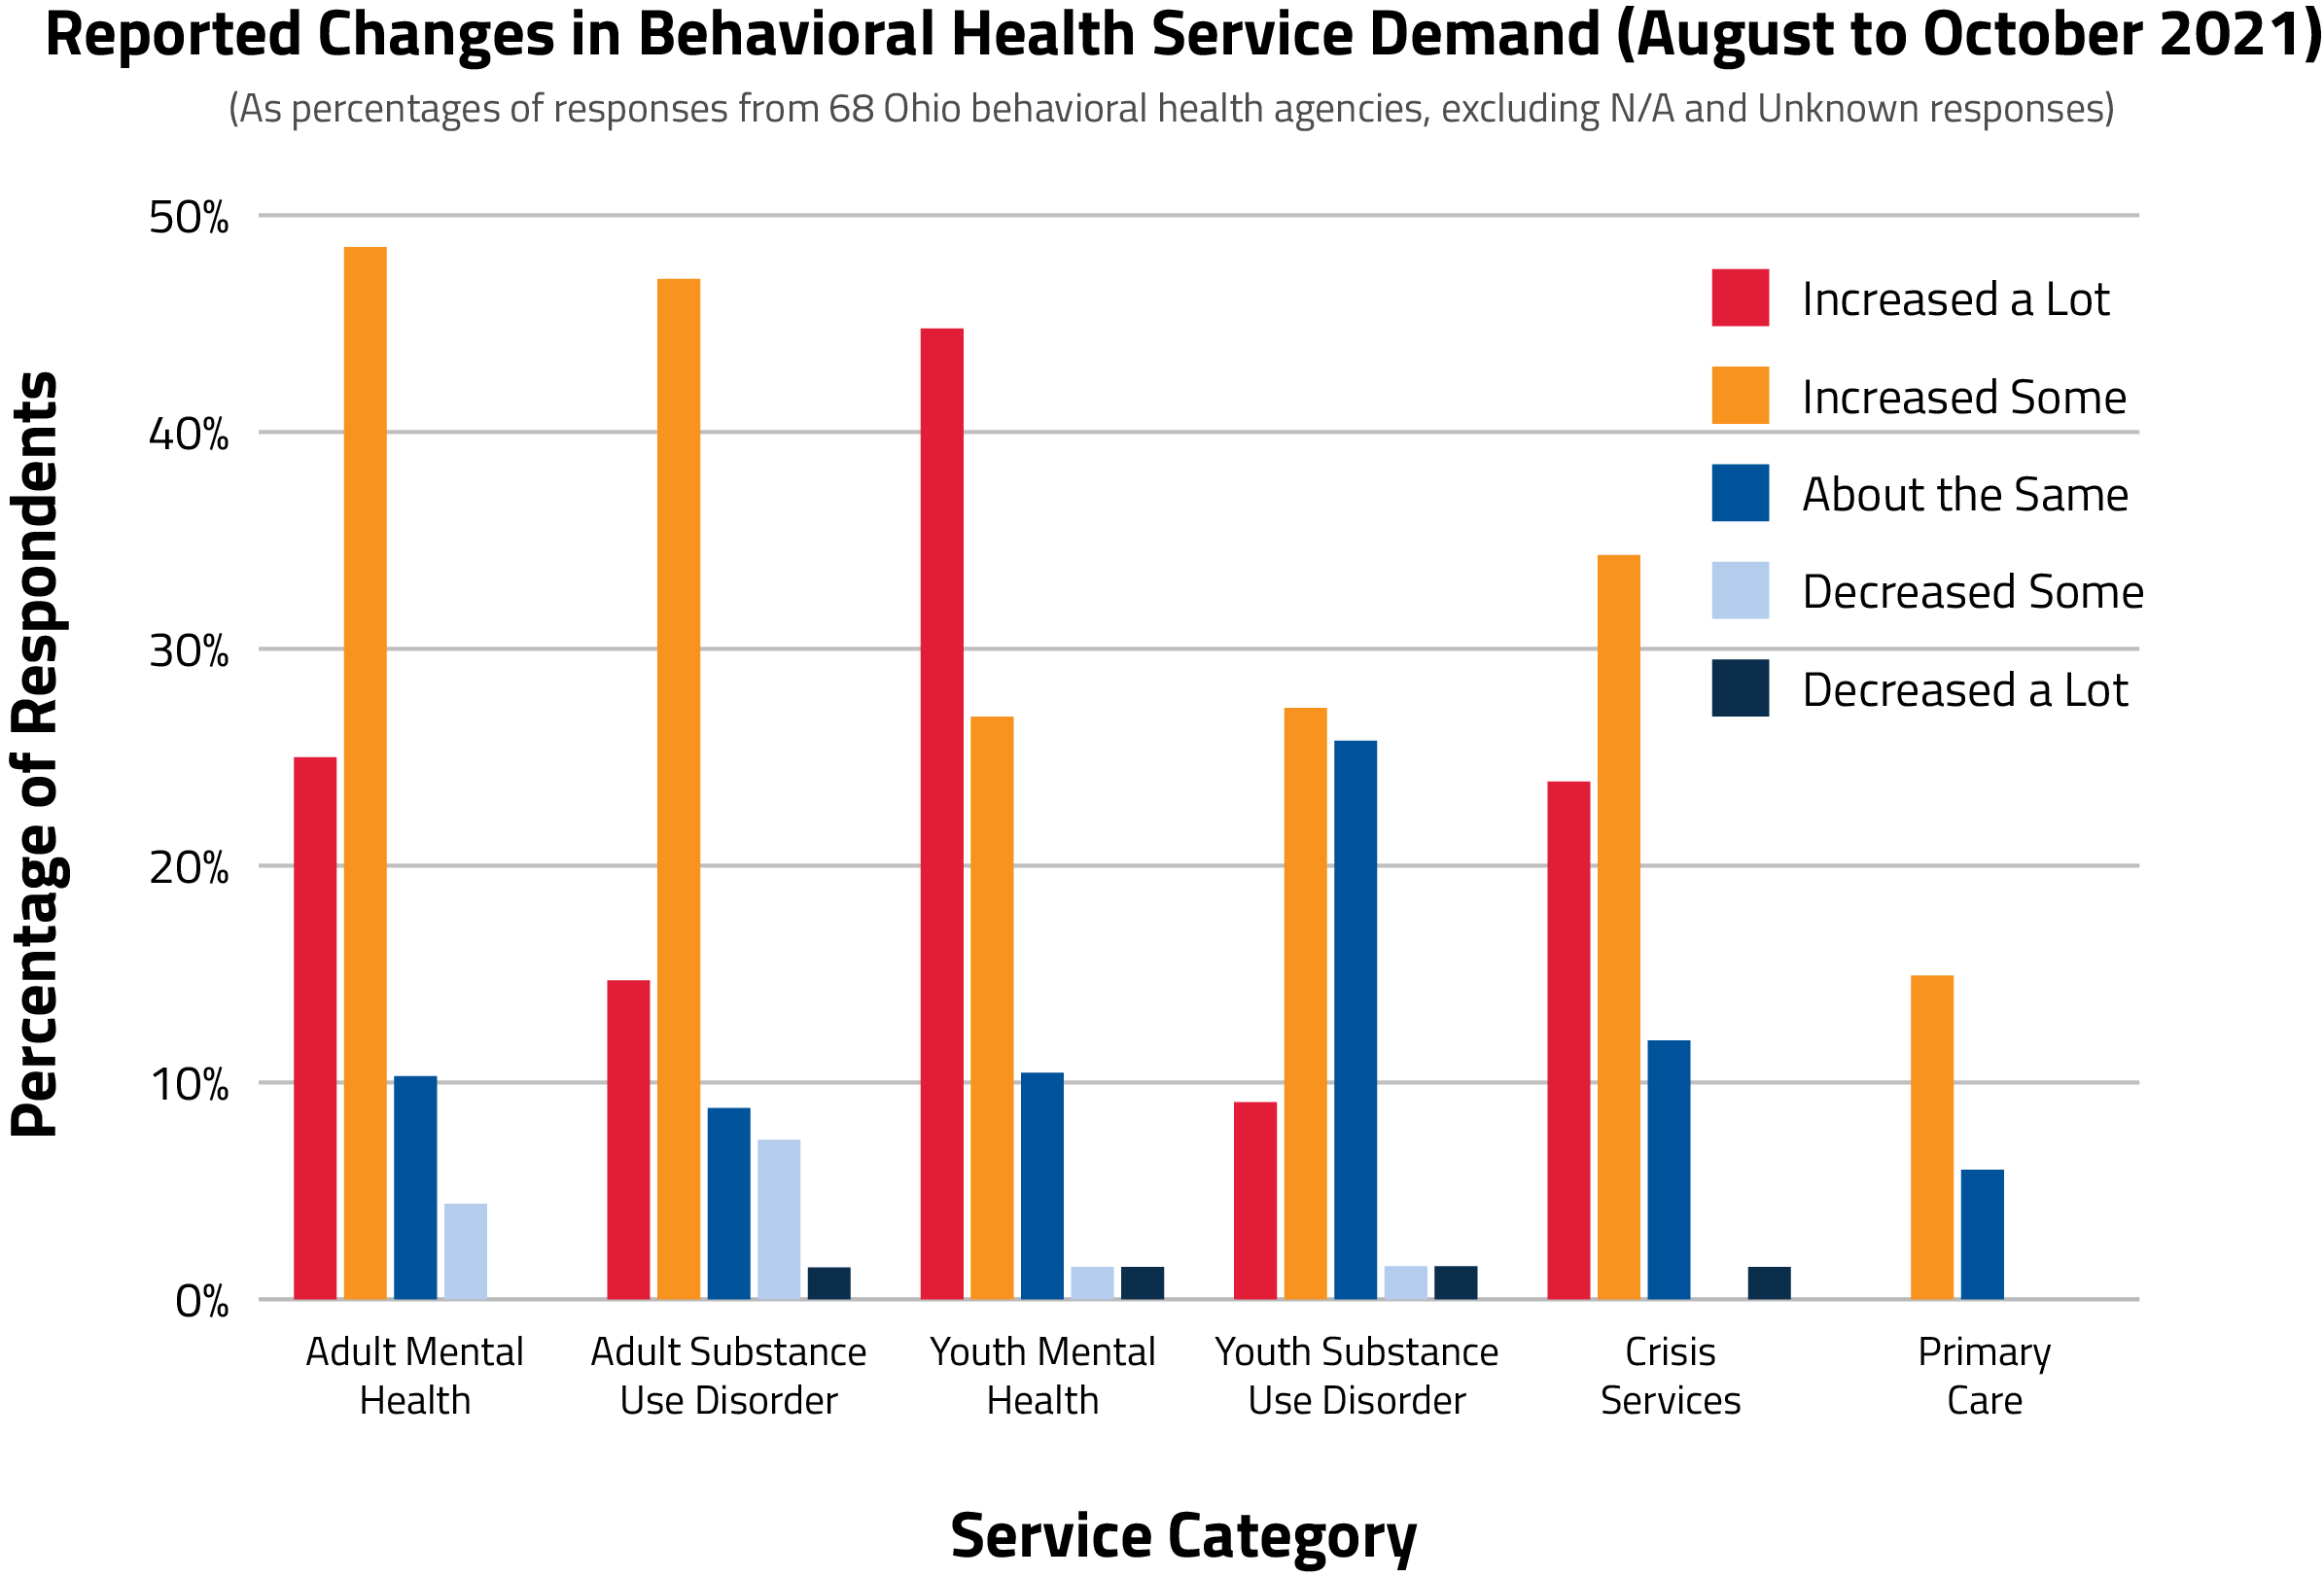 Bar graph showing increases in demand for behavioral health services.